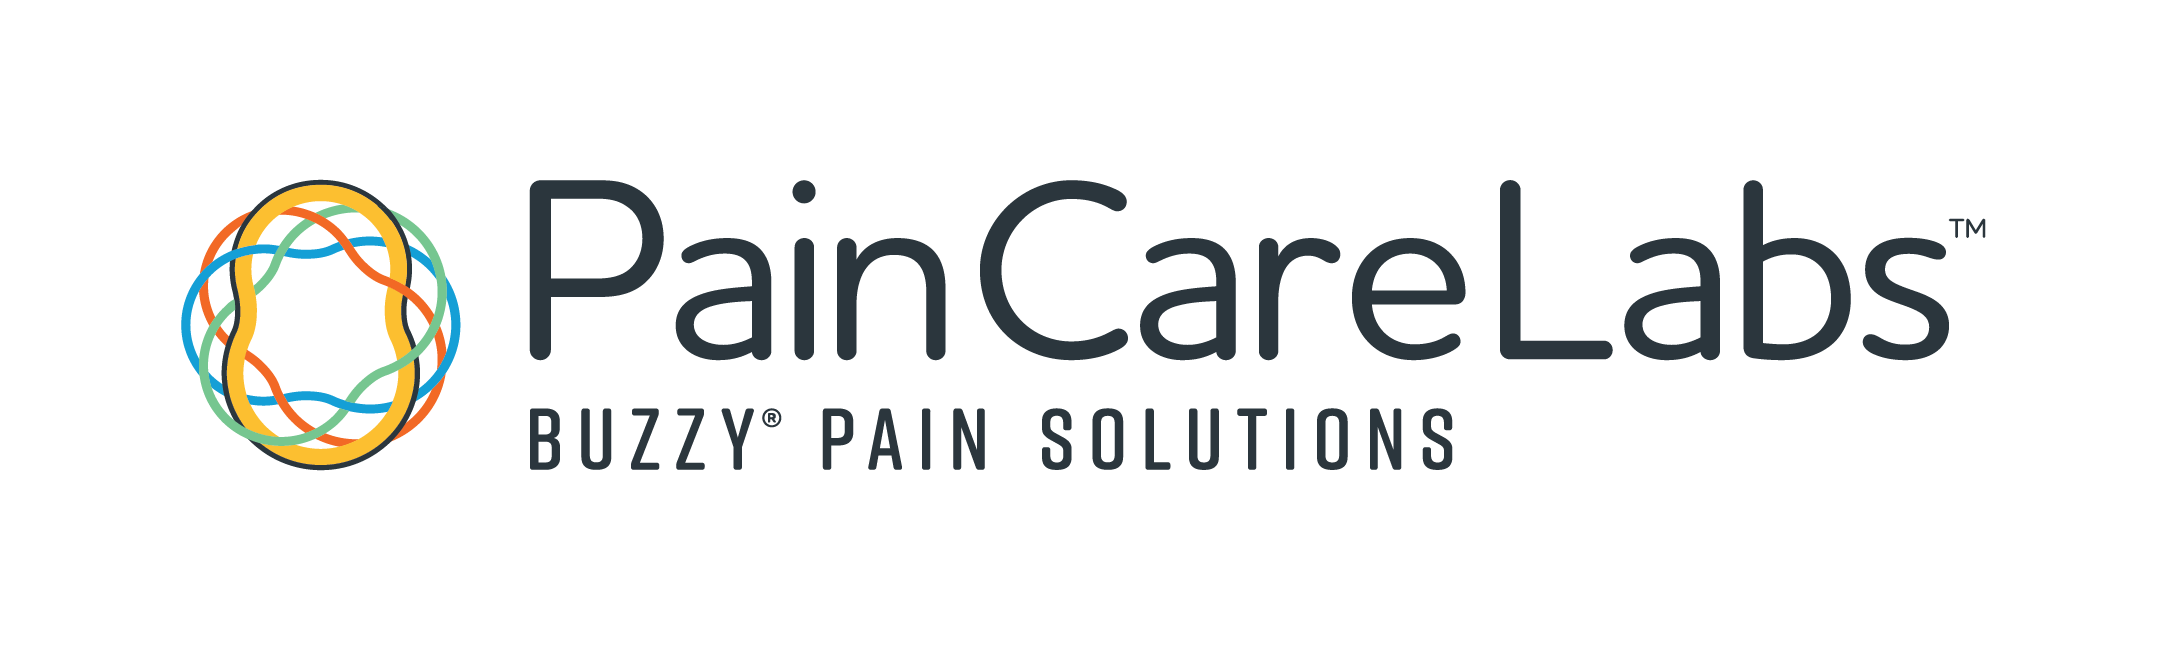 Pain Care Labs logo